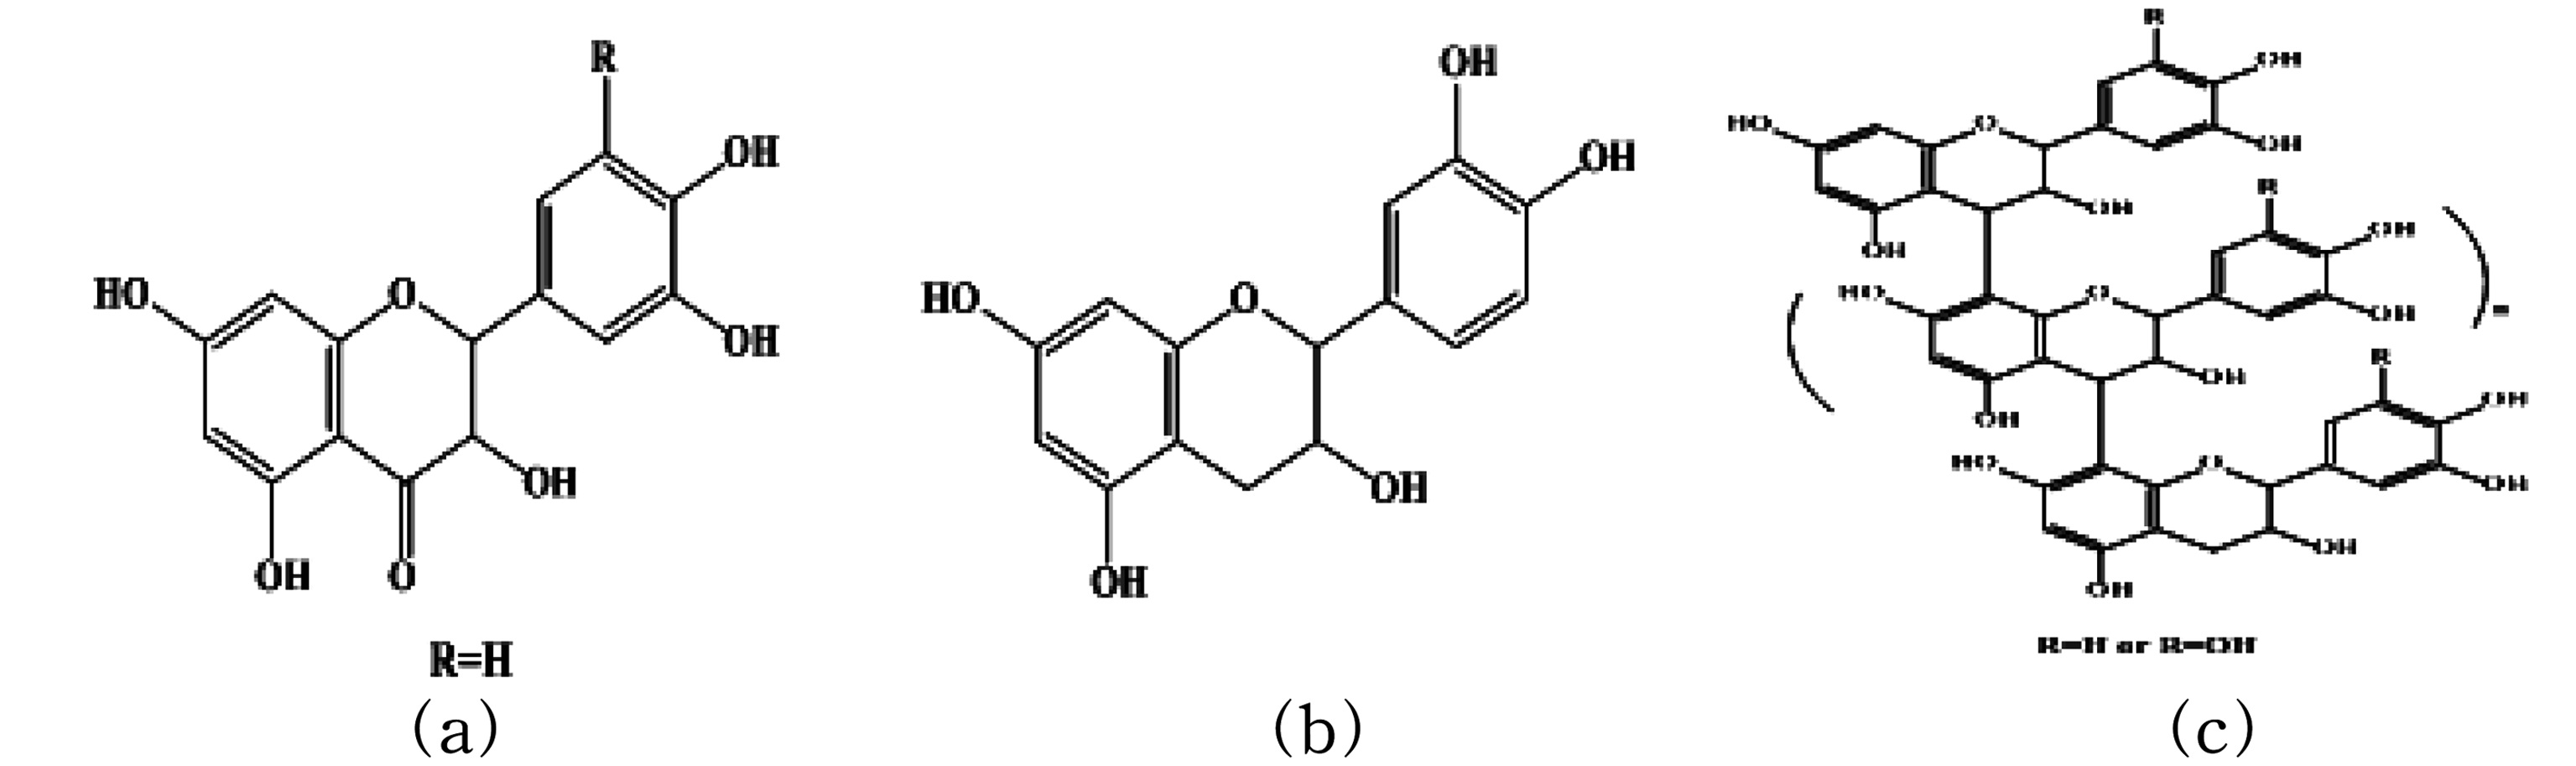 Chemical structure of Taxifolin (a), Epicatechin (b), Procyanidin (c).